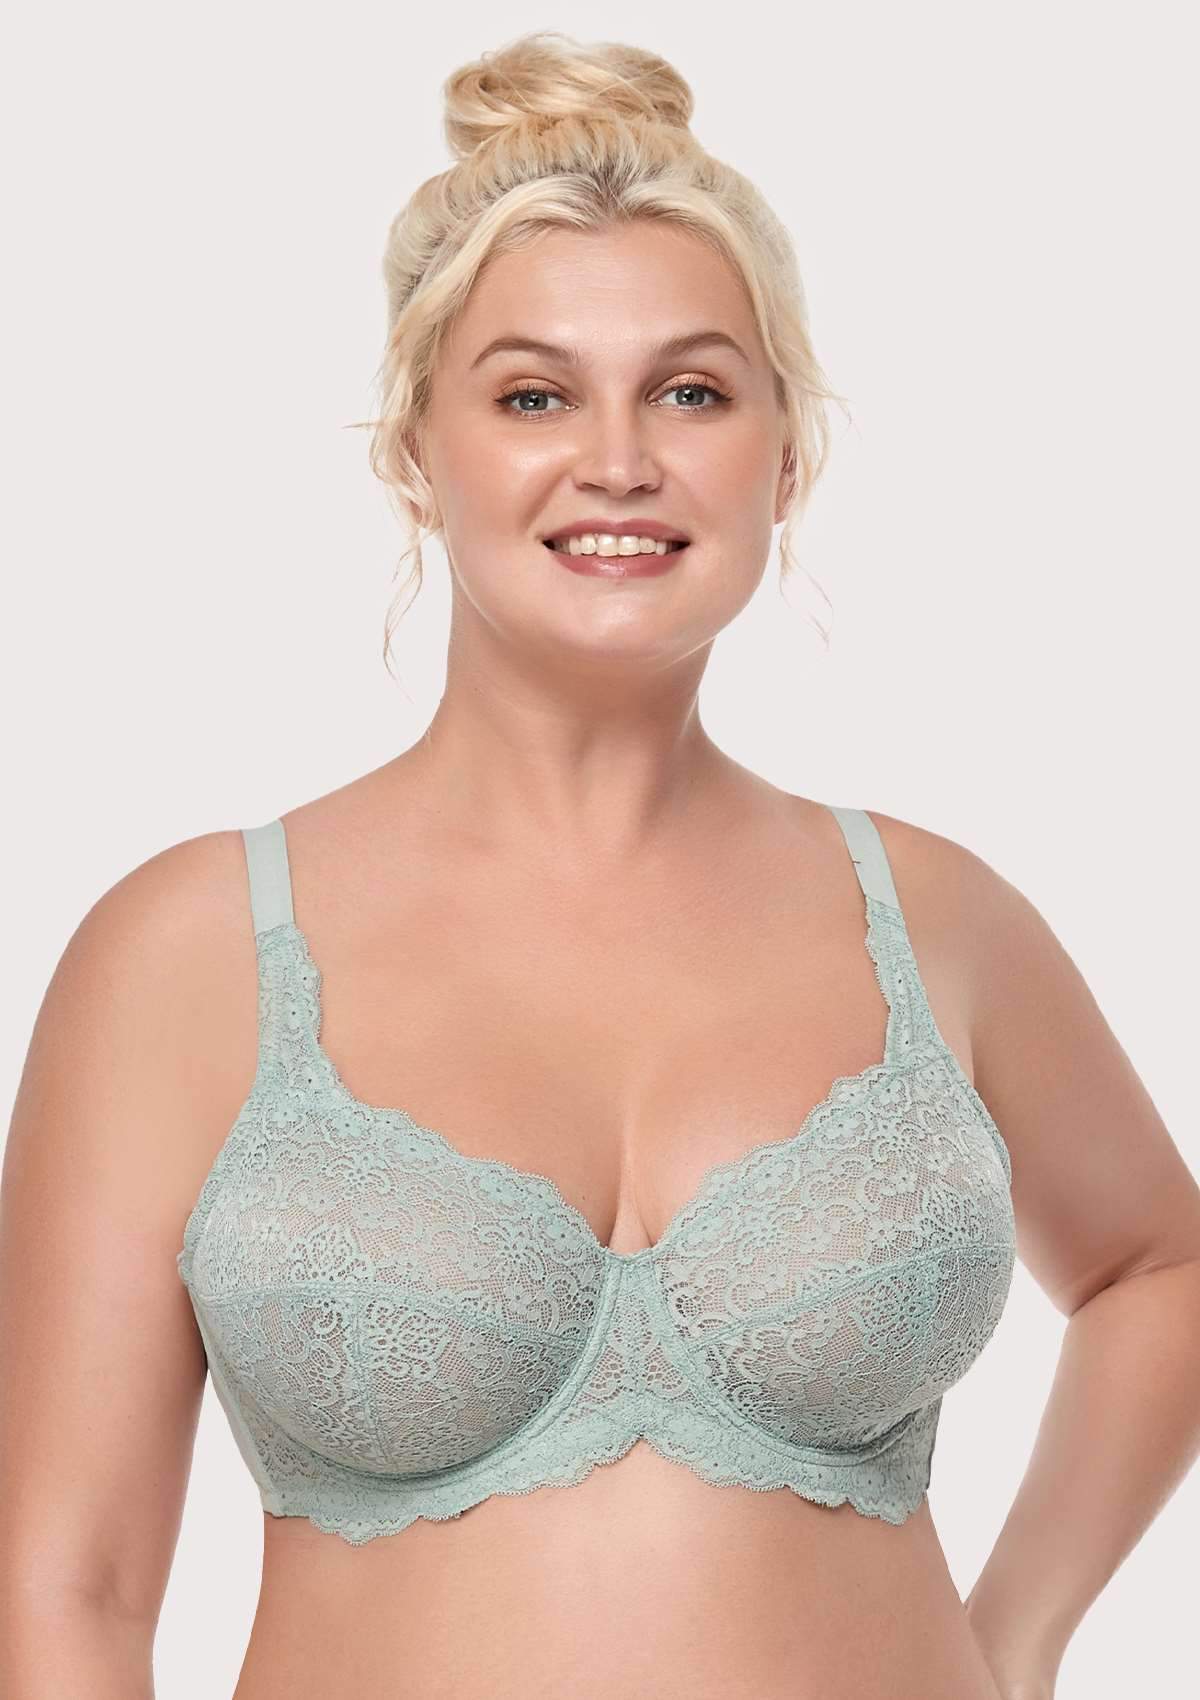 HSIA All-Over Floral Lace: Best Bra For Elderly With Sagging Breasts - Crystal Blue / 34 / DDD/F